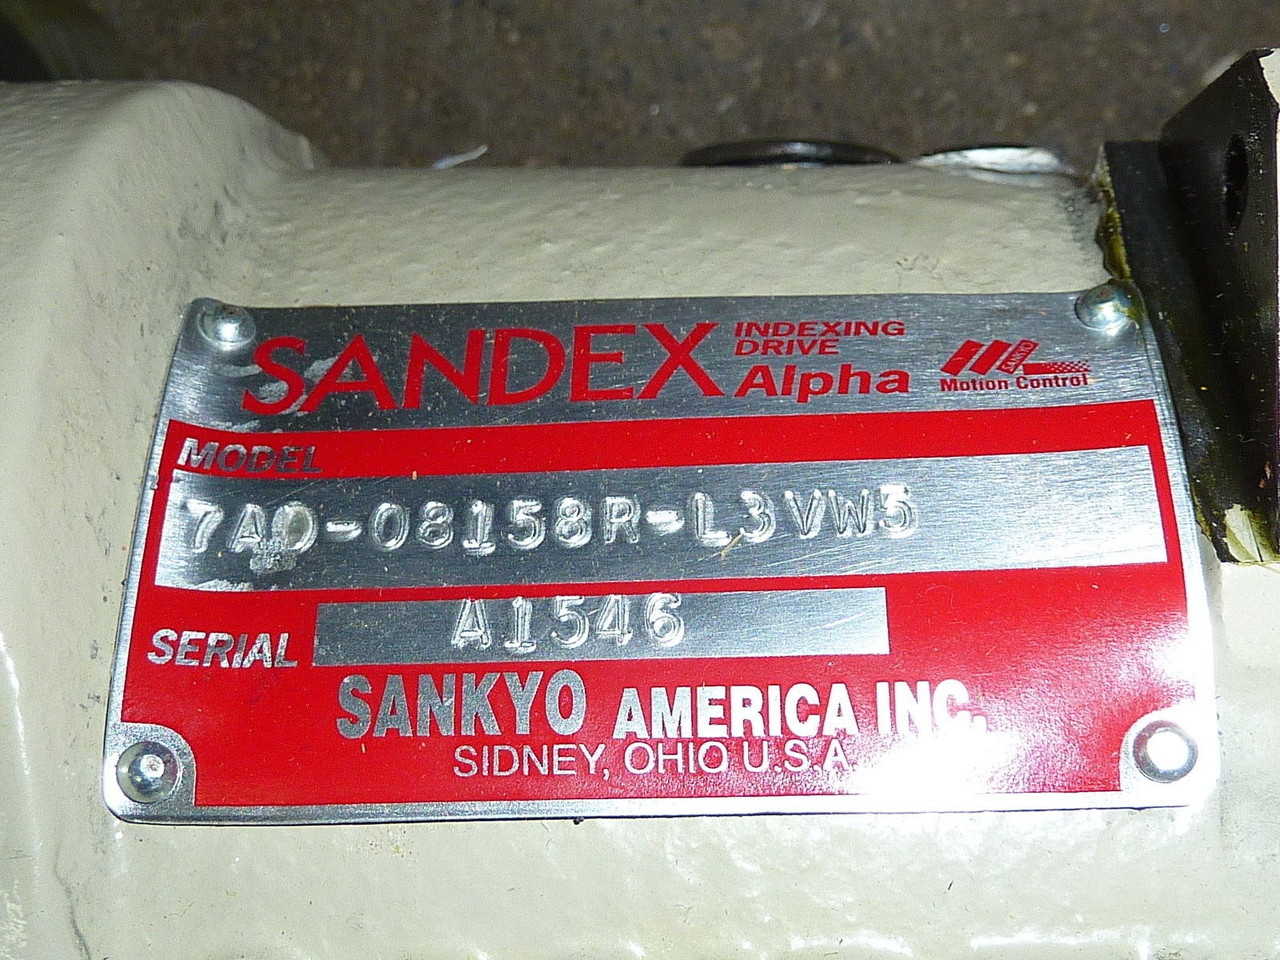 Sandex 7AD-08158R-L3VW5 Indexing Drive USED